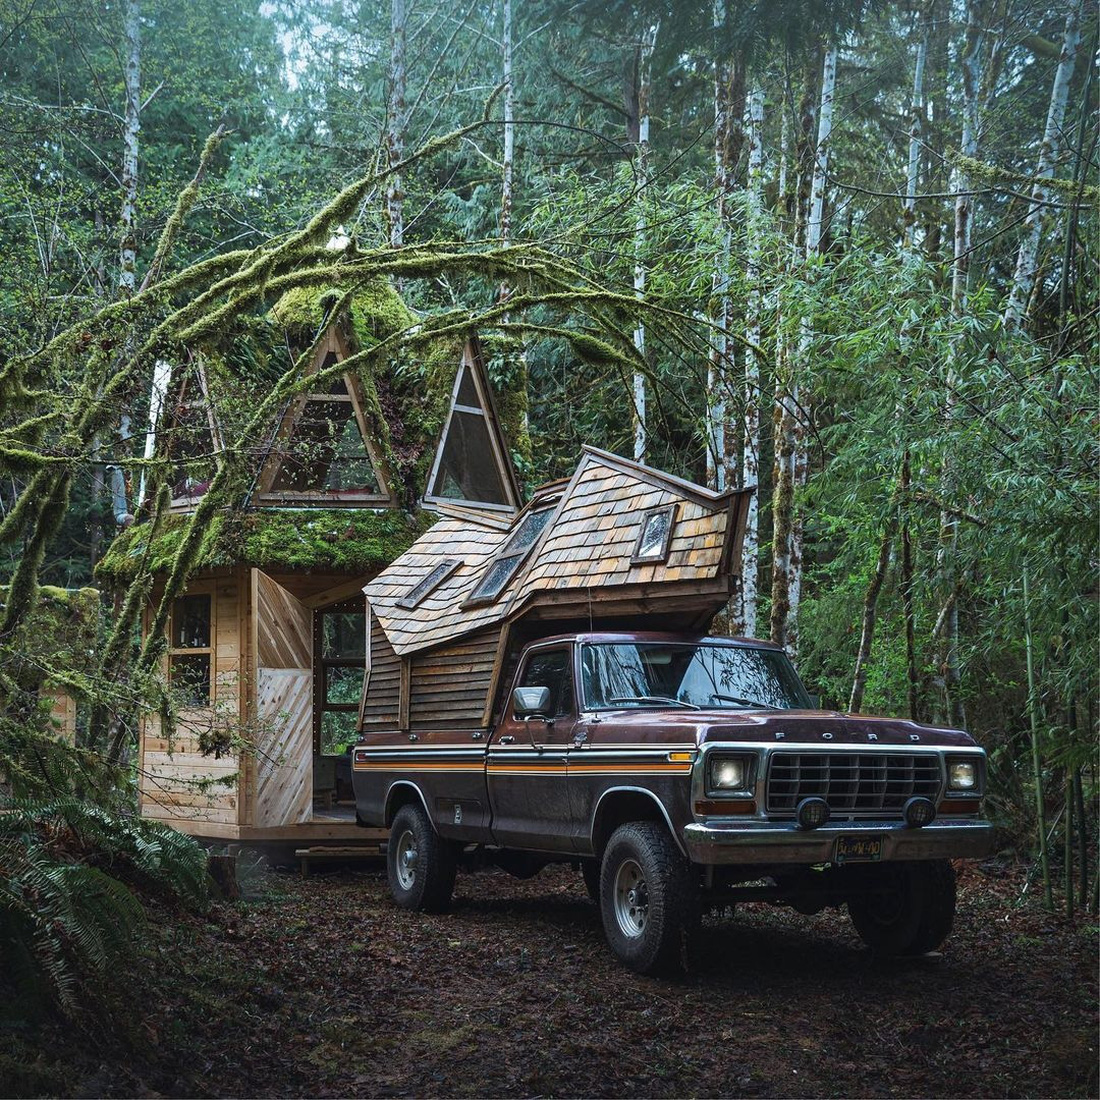 After a long journey, the truck cabin now stands at the spot where the two were transformed into Rainforest Cabinland.  This was also a temporary agreement between Jacob and Sarah.  Due to not being taken away for a long time, the Ford pickup has started rusting, the house no longer has windows and looks desolate.